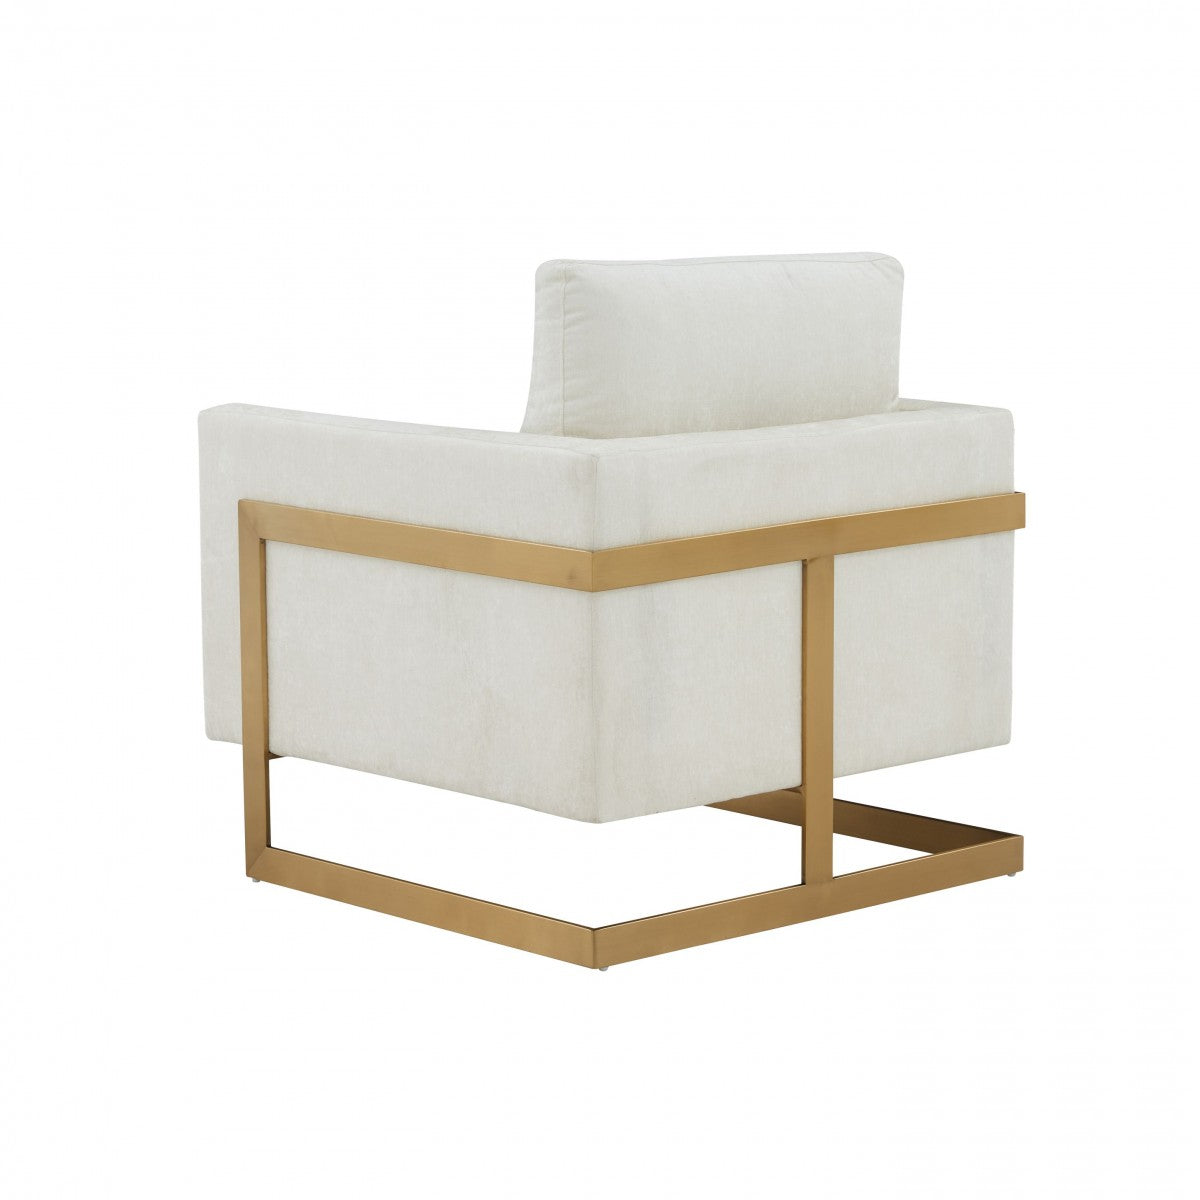 Modrest Prince - Contemporary Cream Fabric + Gold Metal Accent Chair